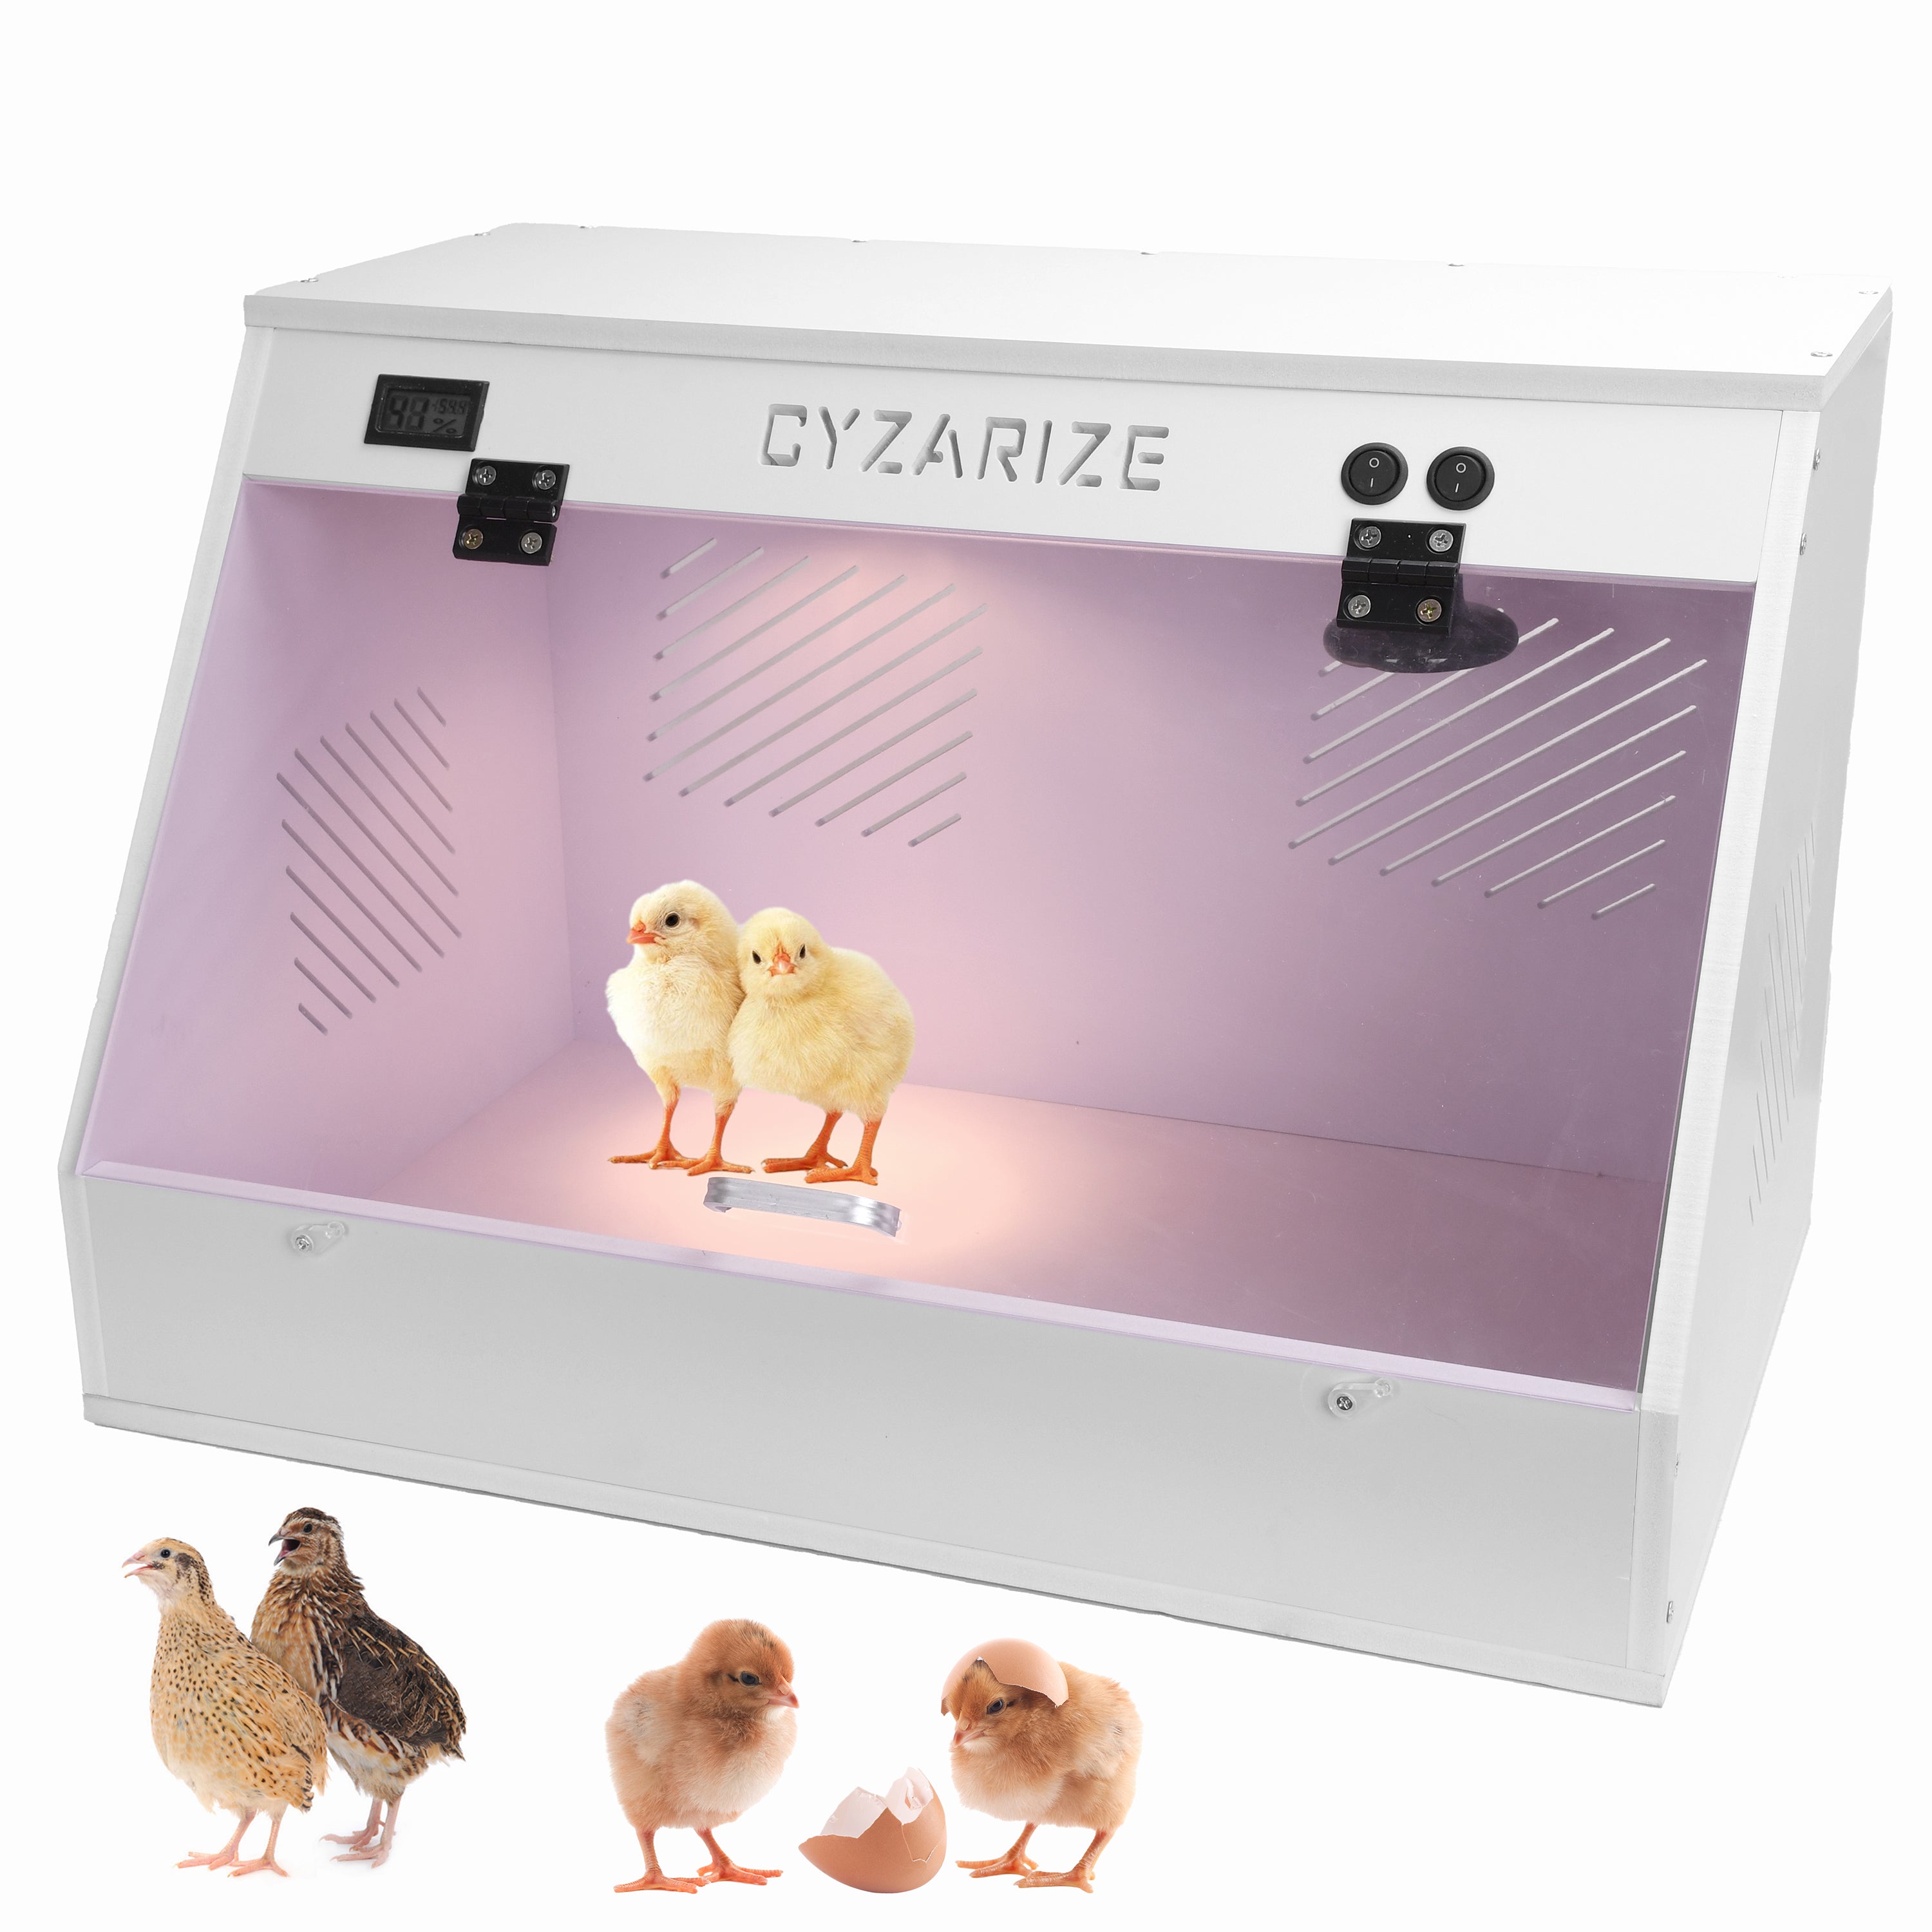 Chicken Brooder Box Chick Brooding Box with Heat Lamp Ideal for Chicks/Ducks/Quail/Rutin Chicken Brooder Box - Holds 12-18 Chicks Visit the